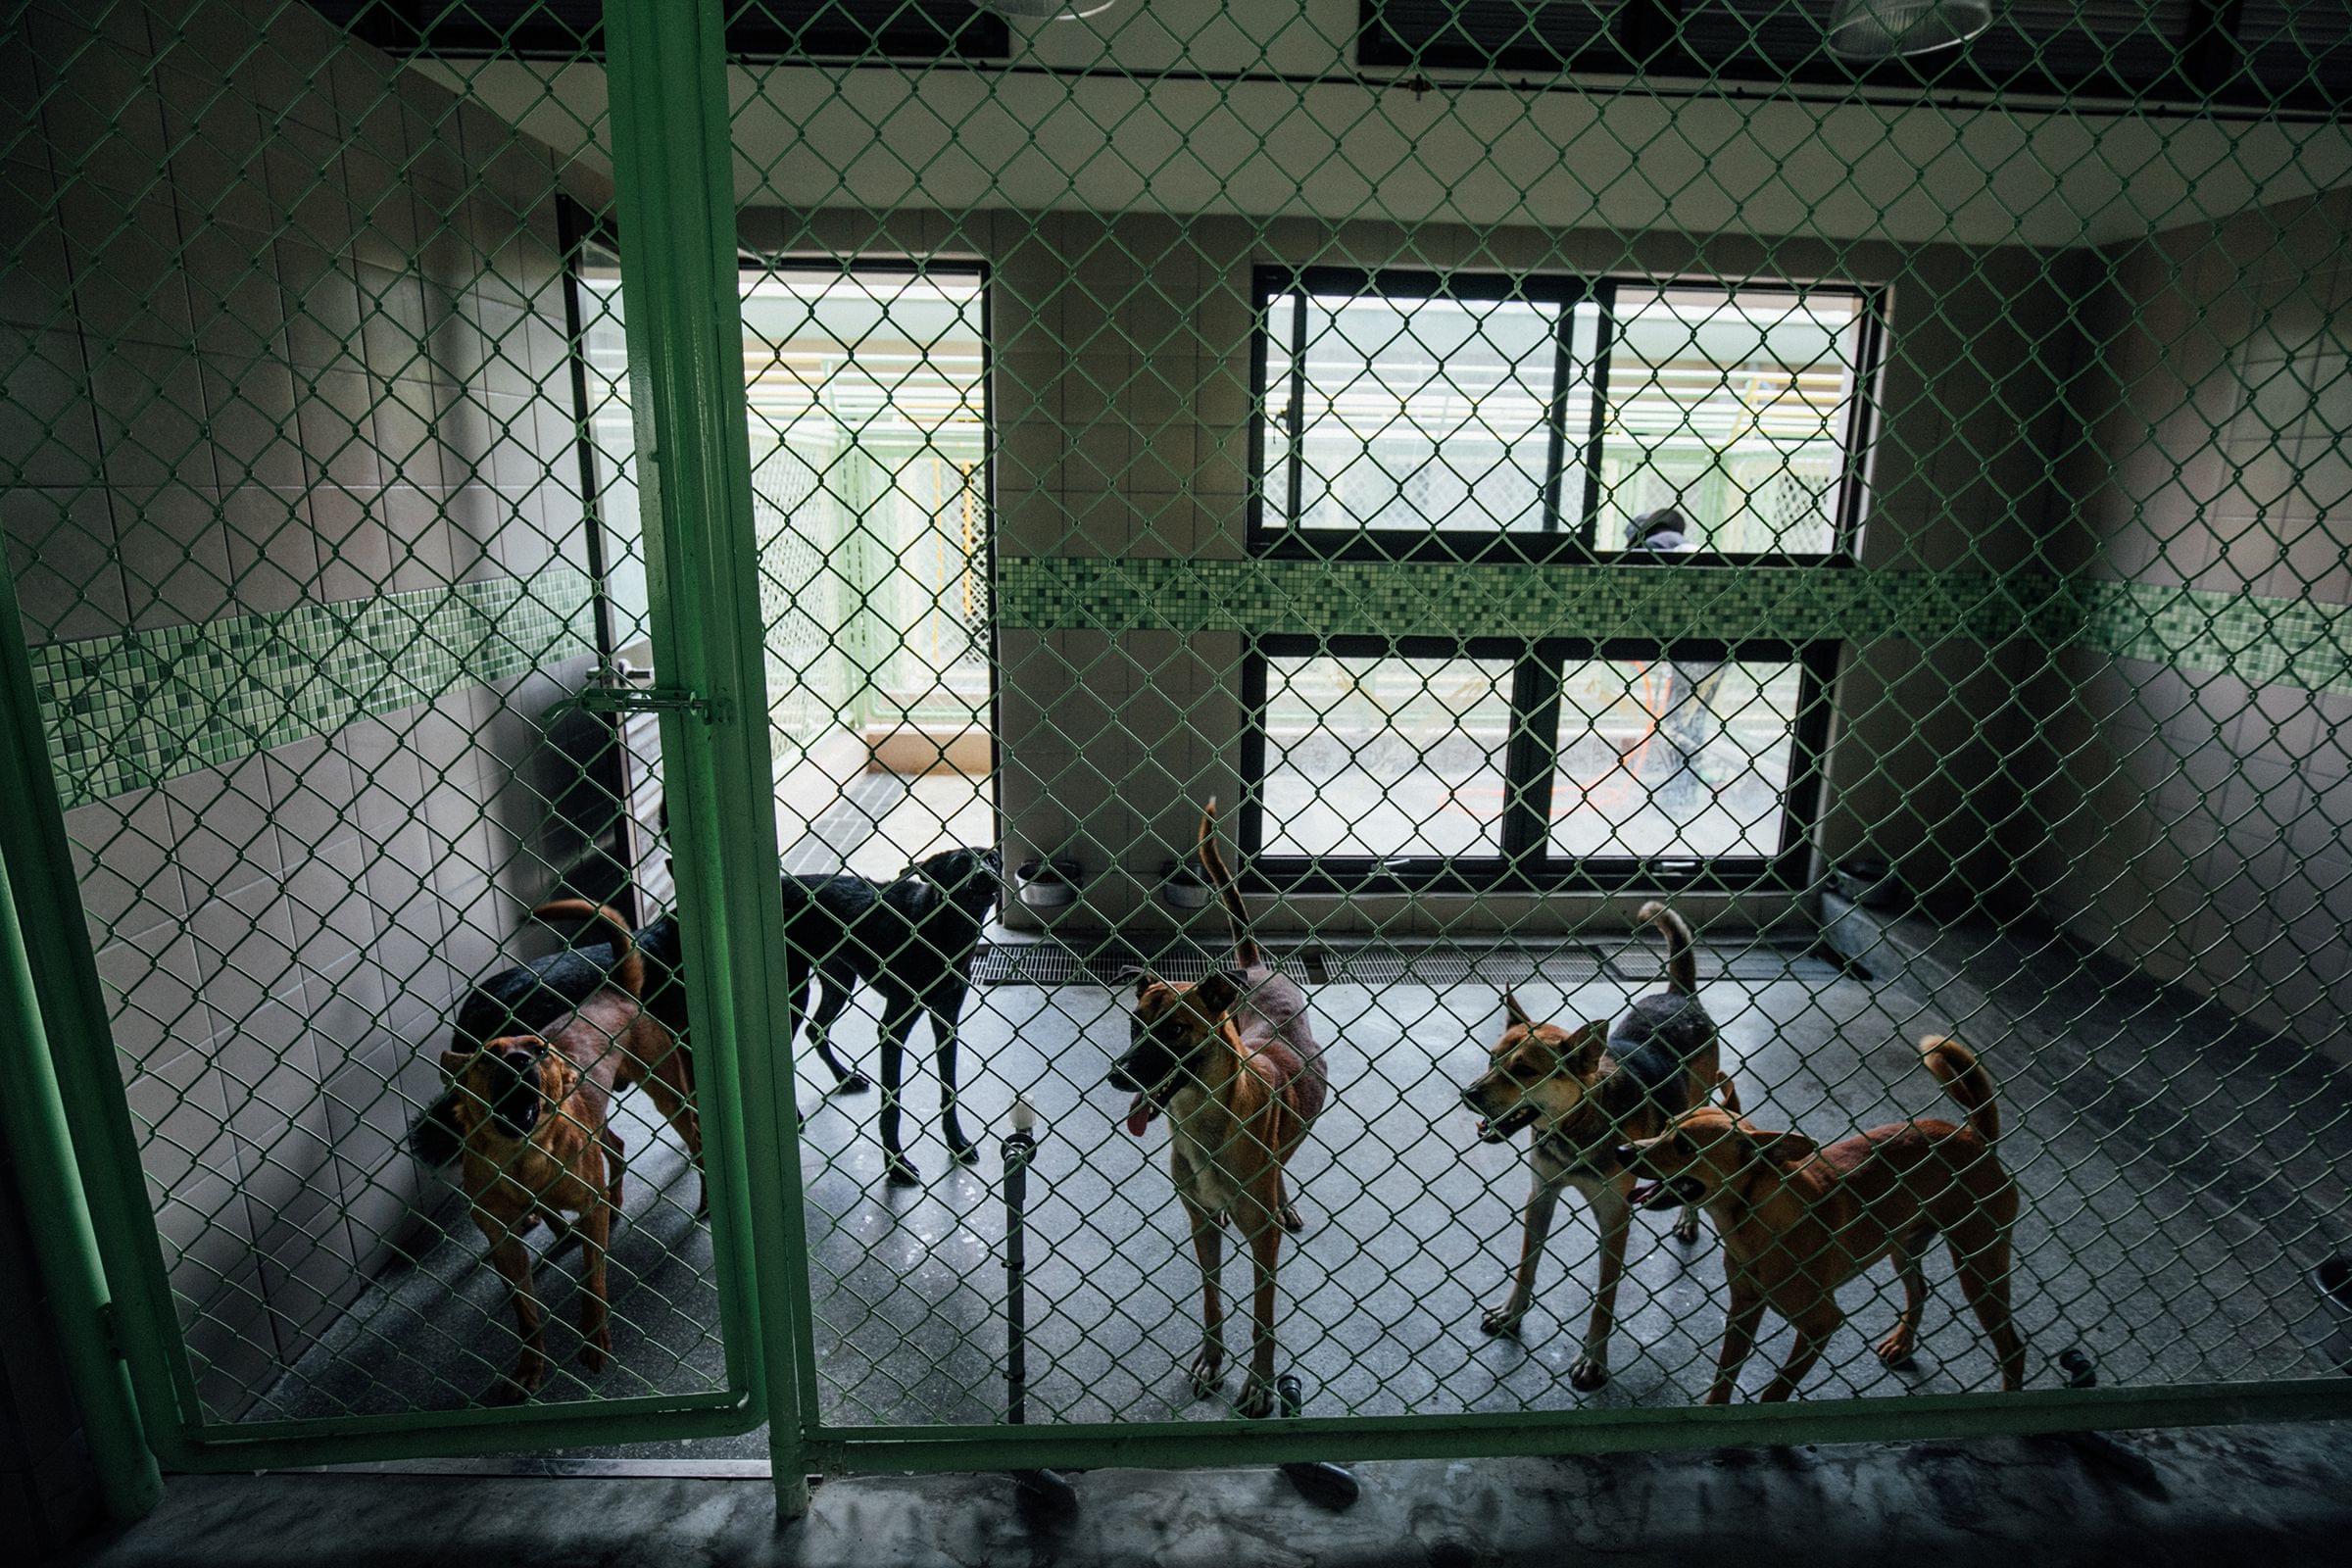 Modern shelters include indoor animal housing areas and outdoor play spaces.